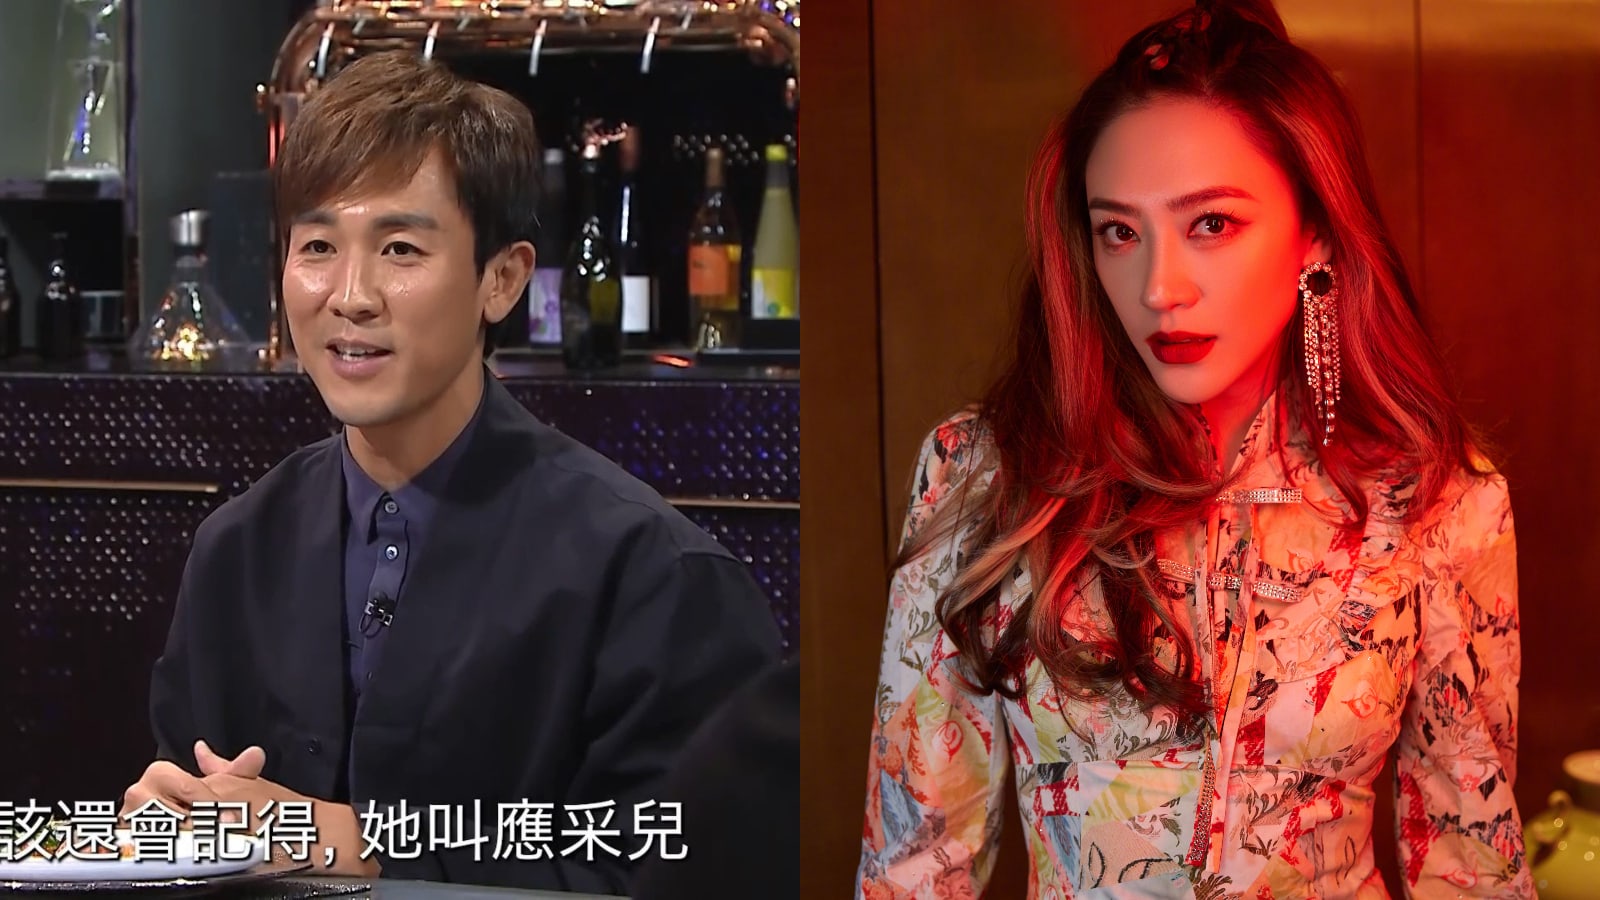 TVB Actor Shaun Tam Says He Was Once Accused Of Molest By A 19-Year-Old Cherrie Ying